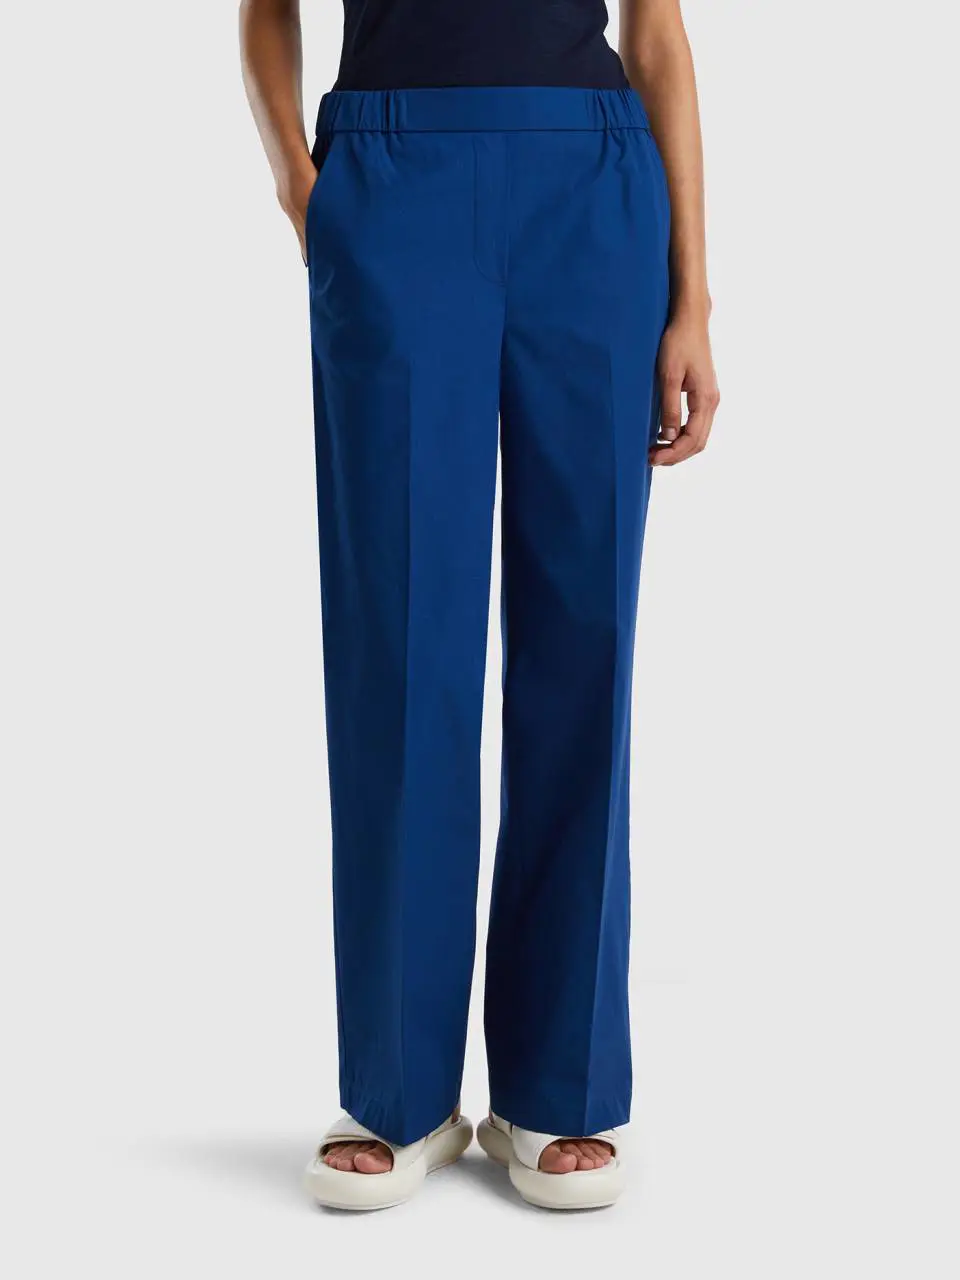 Benetton trousers with elastic waist. 1